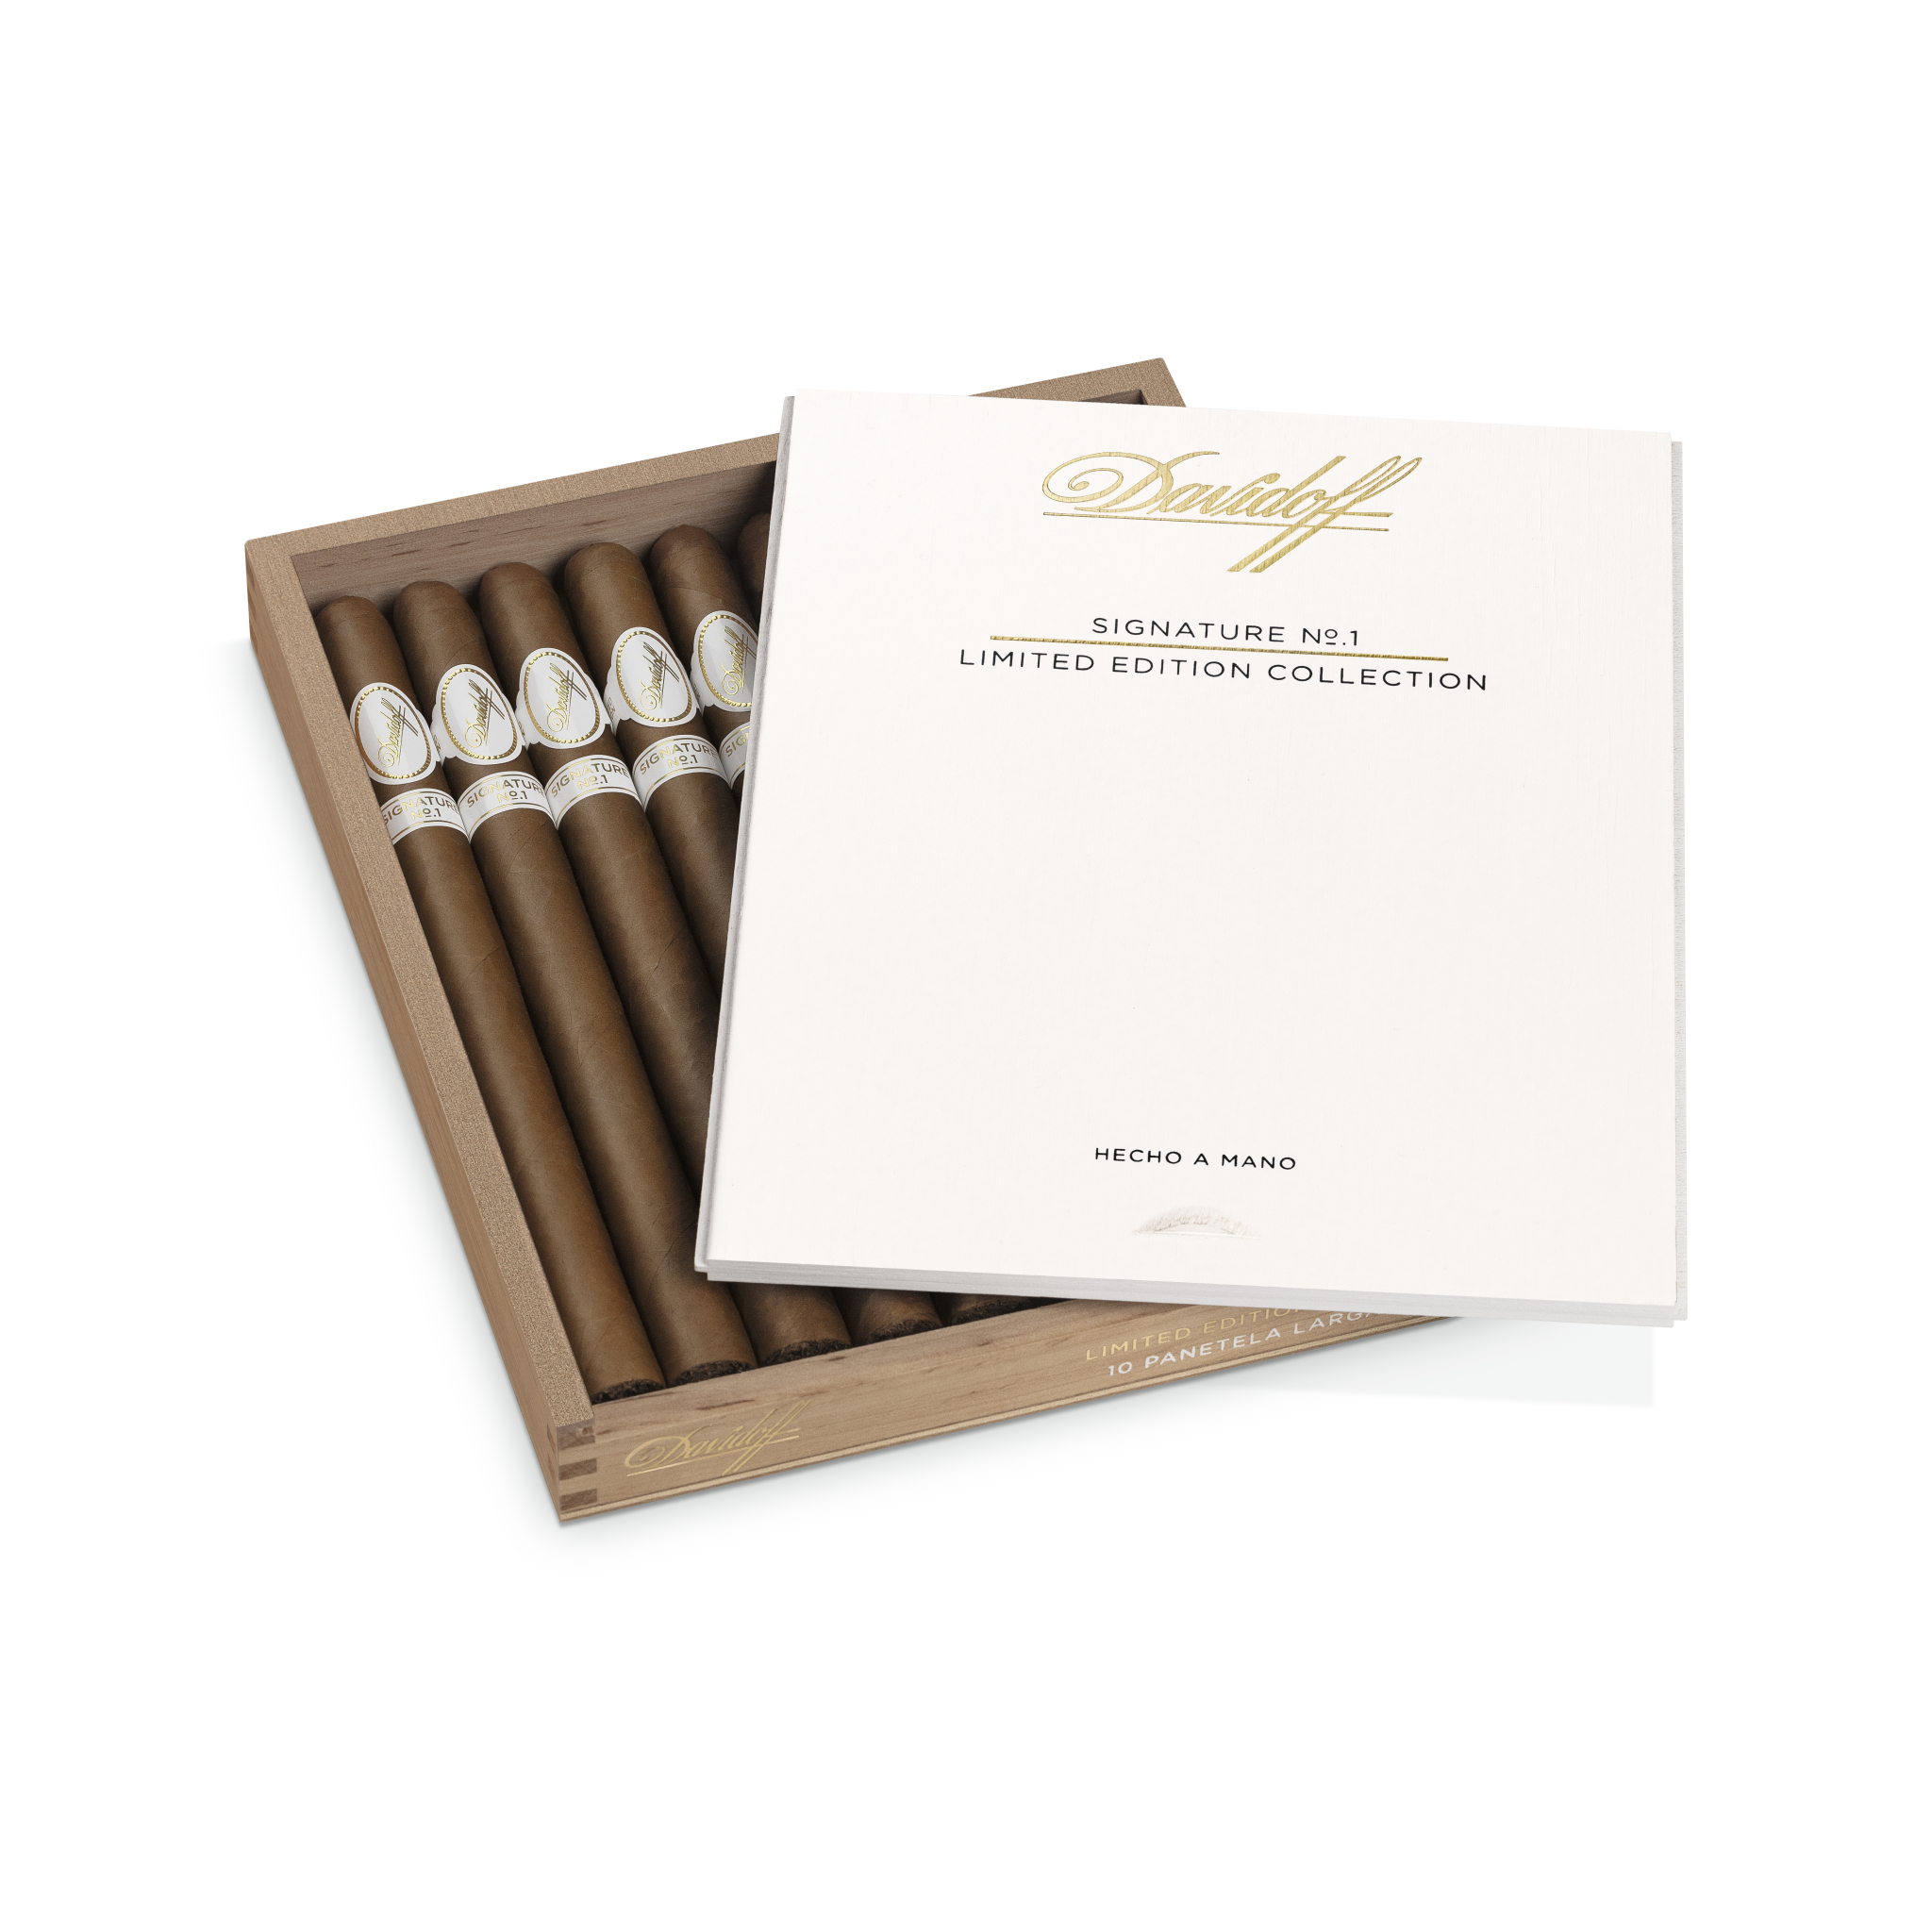 Davidoff Cigars unveils its "The Difference" and brings back its former popular Classic No. 1 as new Limited Edition